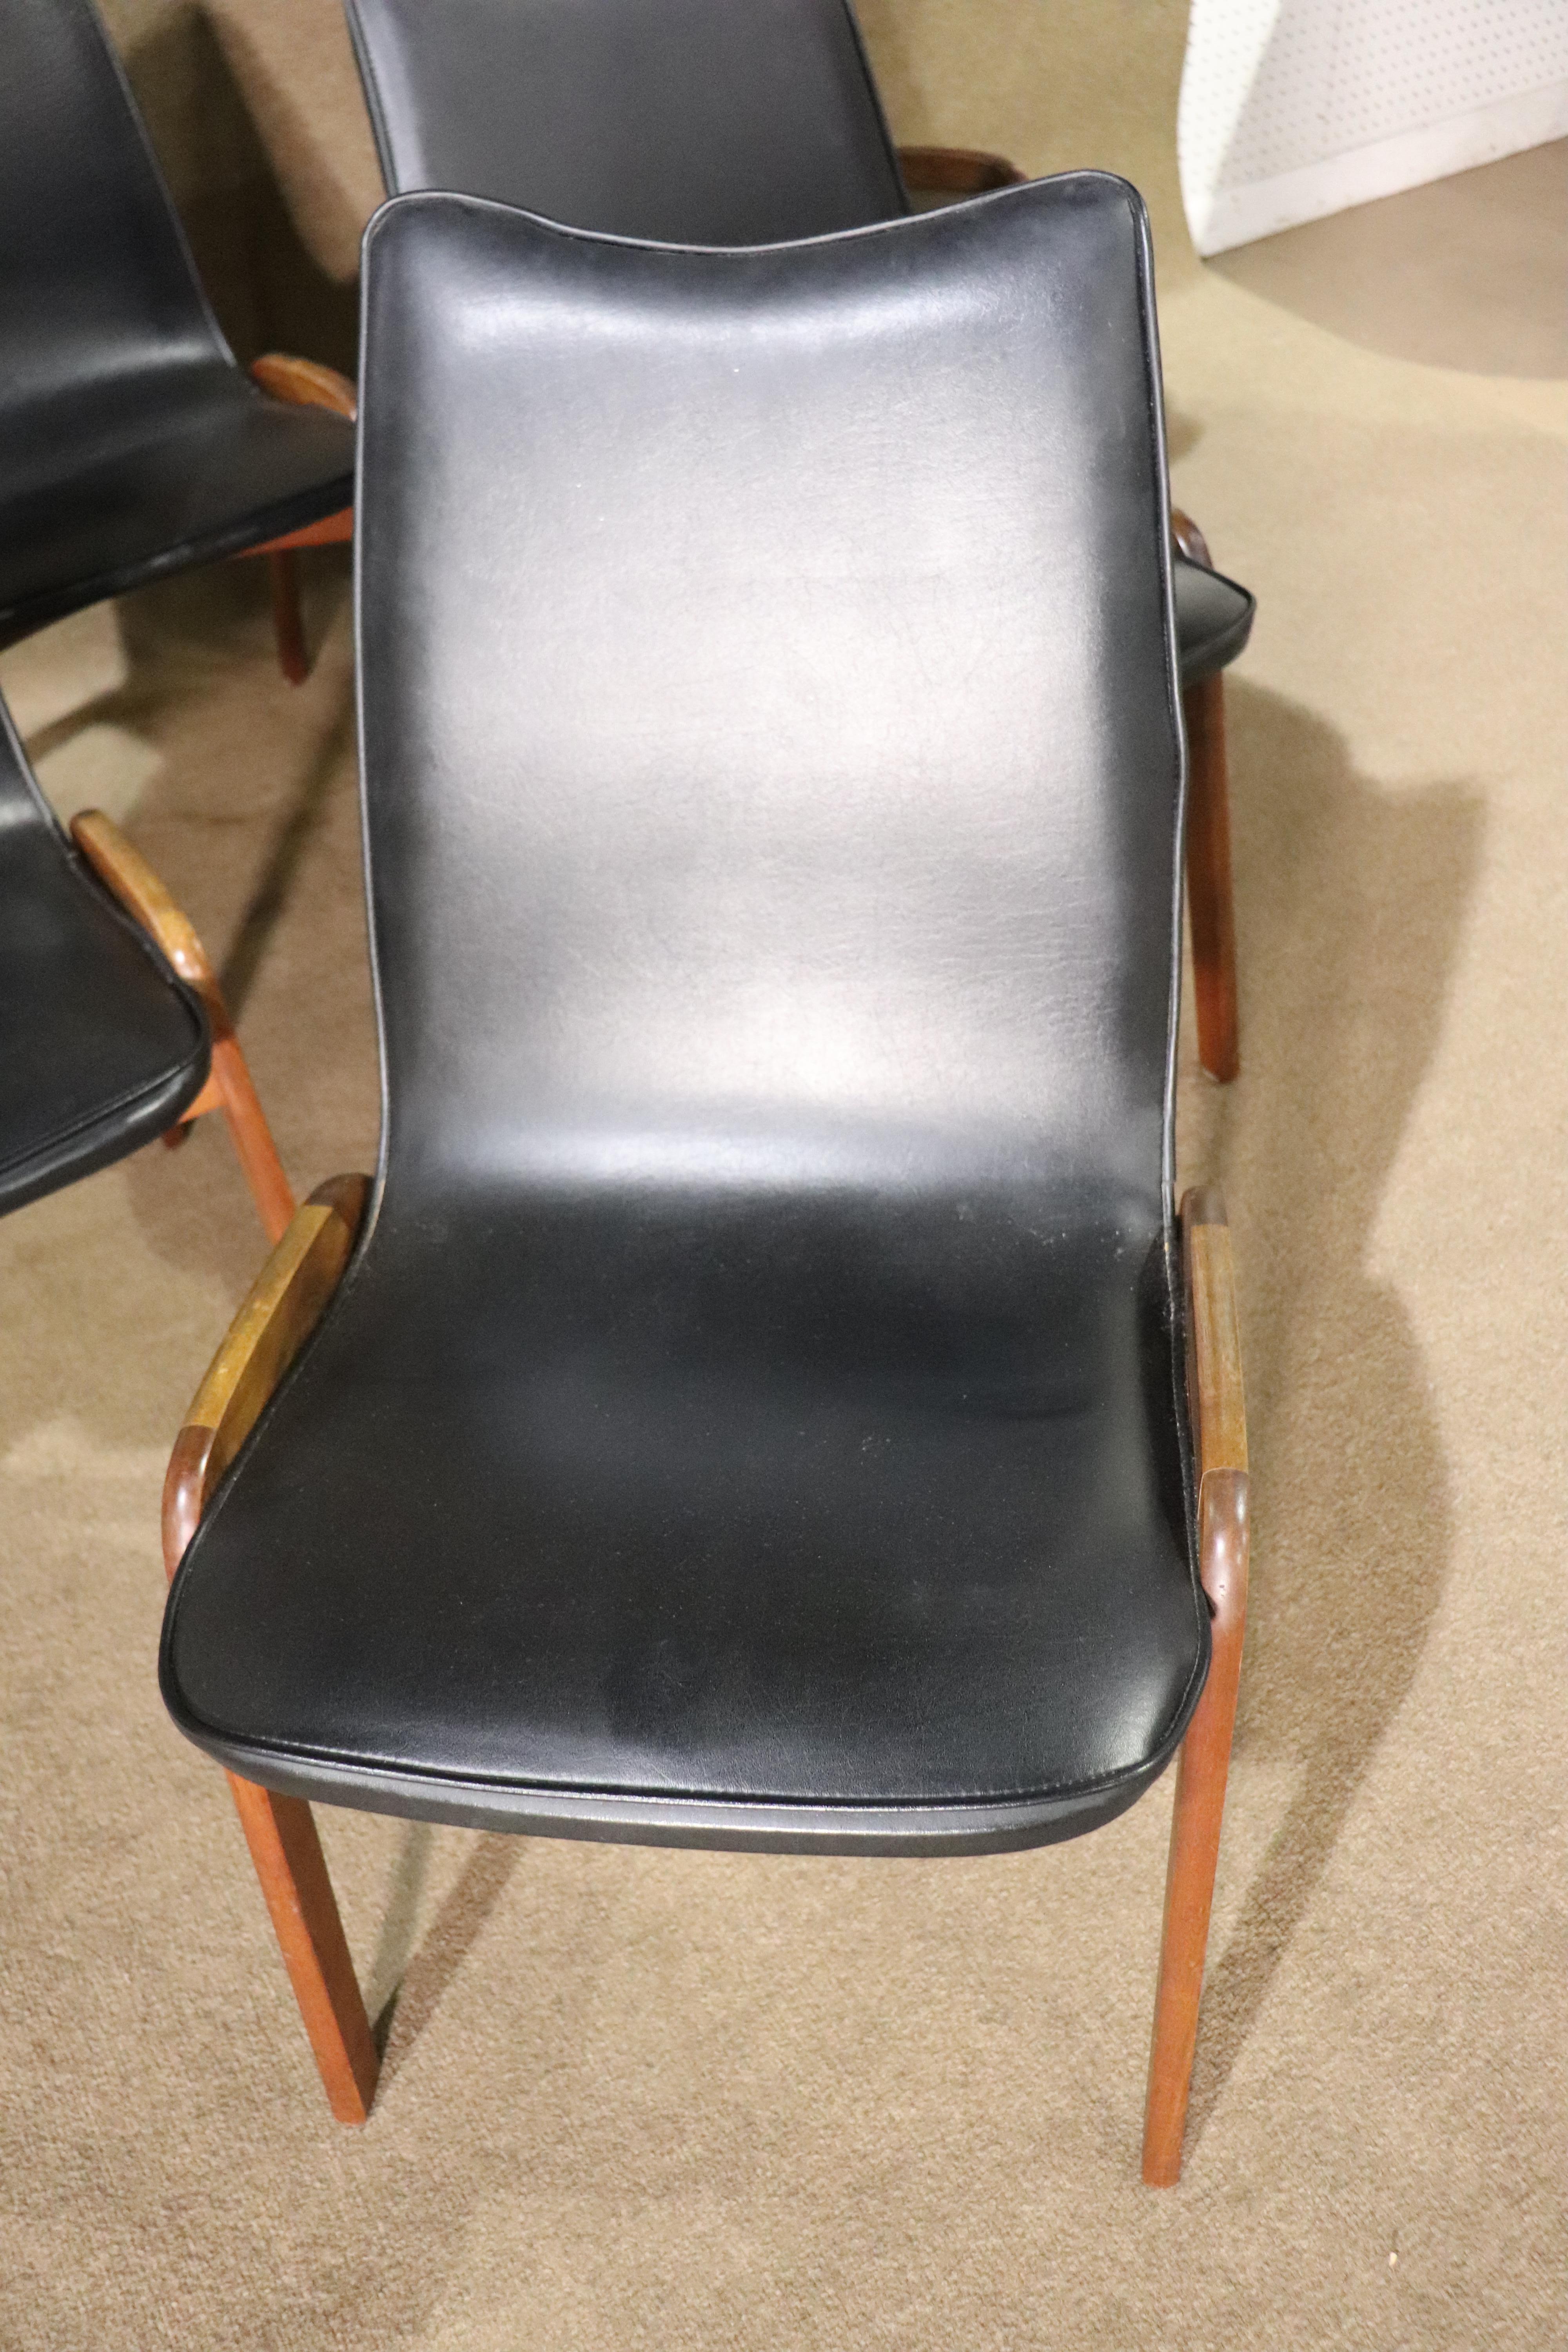 Set of six mid-century modern dining chairs by Chet Beardsley for California Living Designs. Soft, rounded lines throughout, with single seat and back set on a sculpted wood frame.
Please confirm location NY or NJ